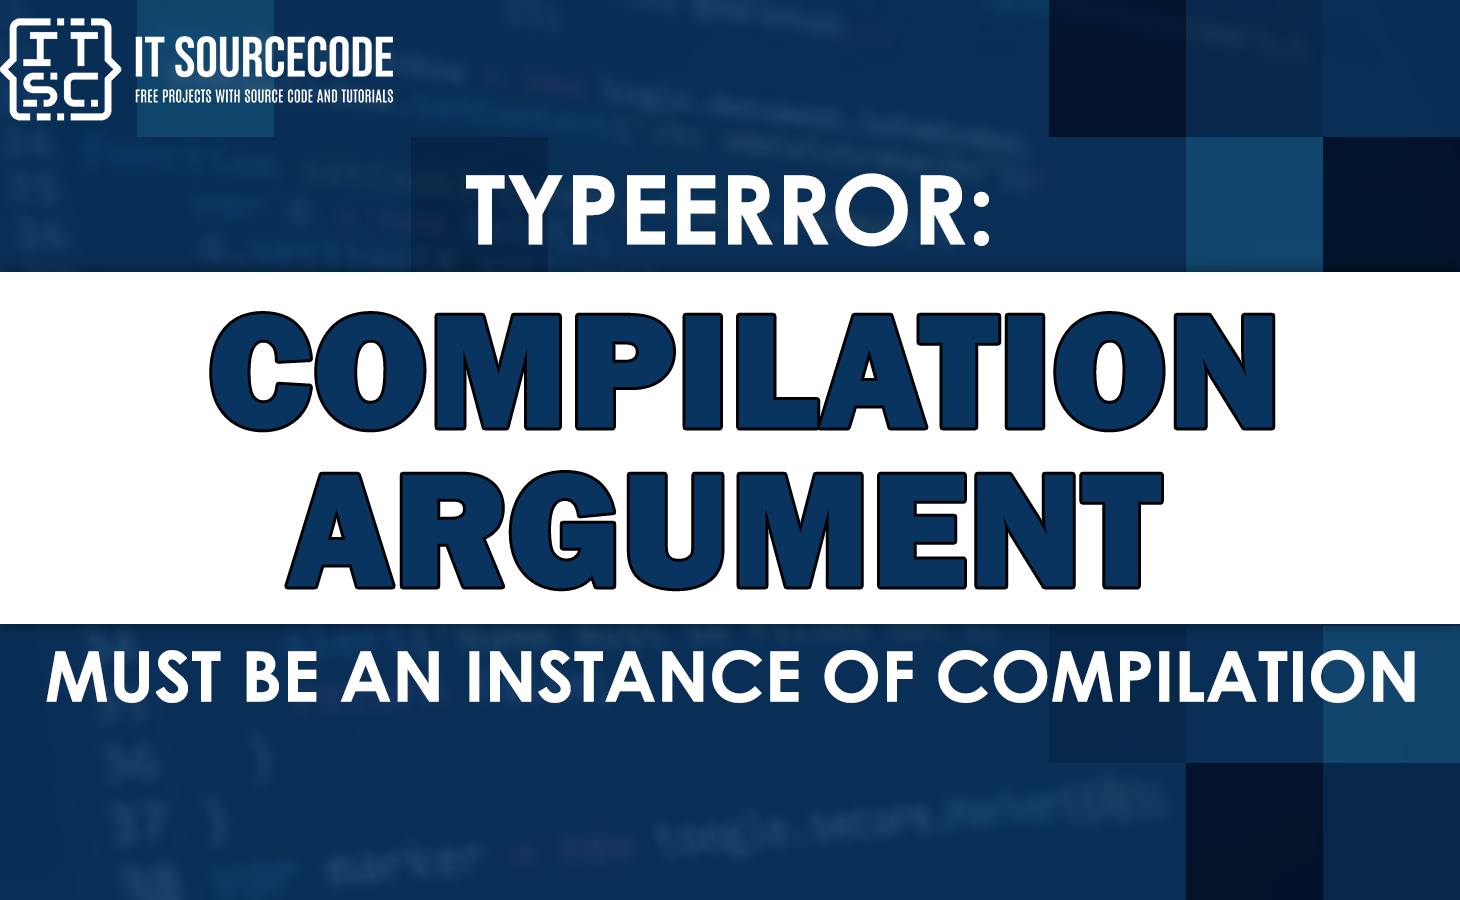 Typeerror the 'compilation' argument must be an instance of compilation